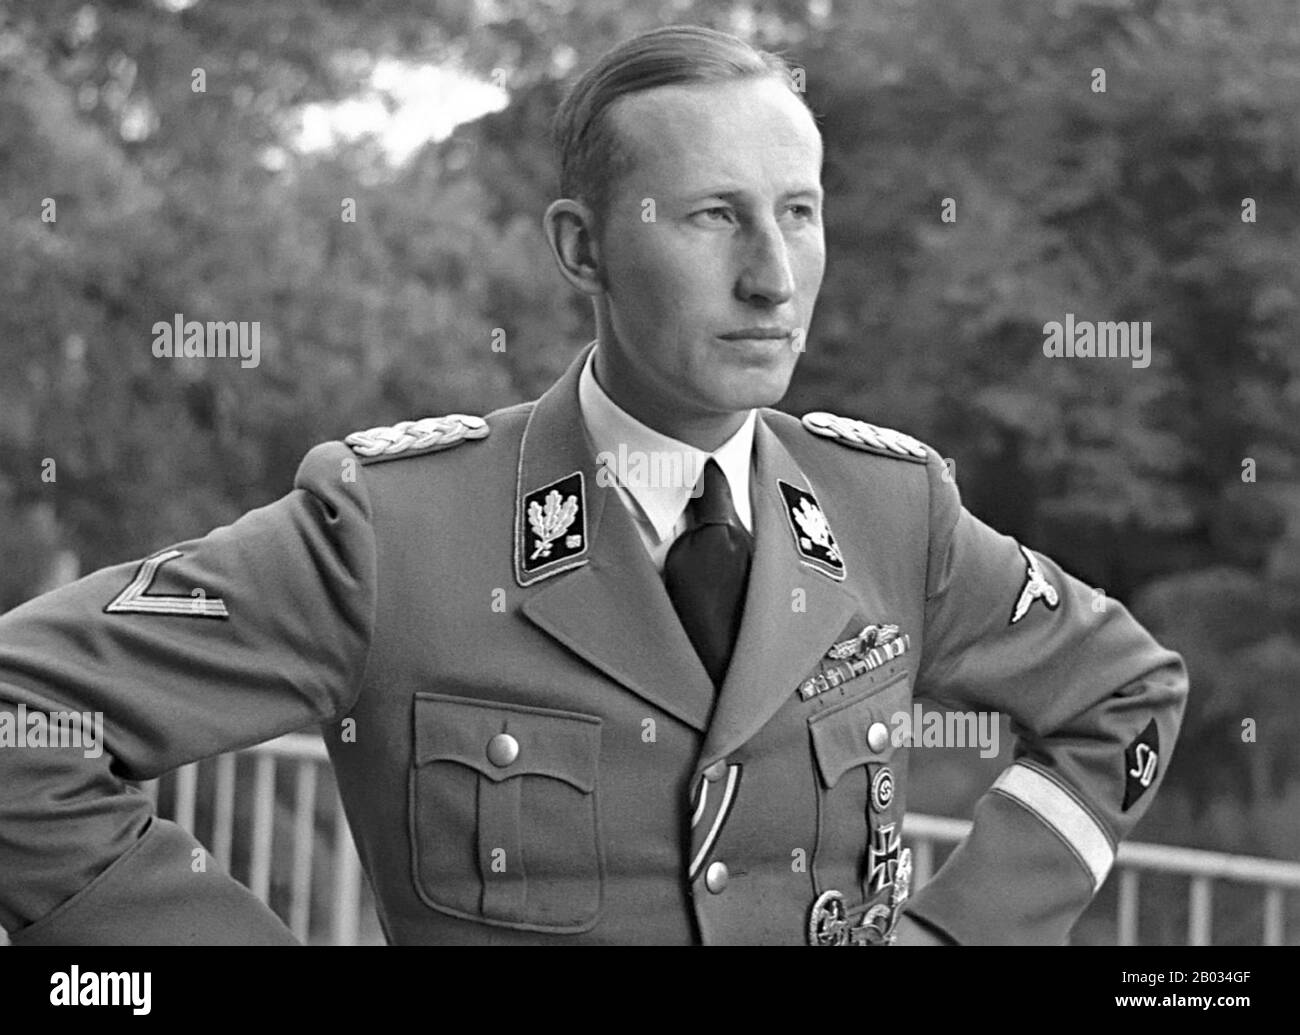 Reinhard Tristan Eugen Heydrich (7 March 1904 – 4 June 1942) was a high-ranking German Nazi official during World War II, and one of the main architects of the Holocaust. He was SS-Obergruppenführer und General der Polizei (Senior Group Leader and Chief of Police) as well as chief of the Reich Main Security Office (including the Gestapo, Kripo, and SD).  He was also Stellvertretender Reichsprotektor (Deputy/Acting Reich-Protector) of Bohemia and Moravia, in what is now the Czech Republic. Heydrich chaired the January 1942 Wannsee Conference, which formalised plans for the Final Solution to the Stock Photo